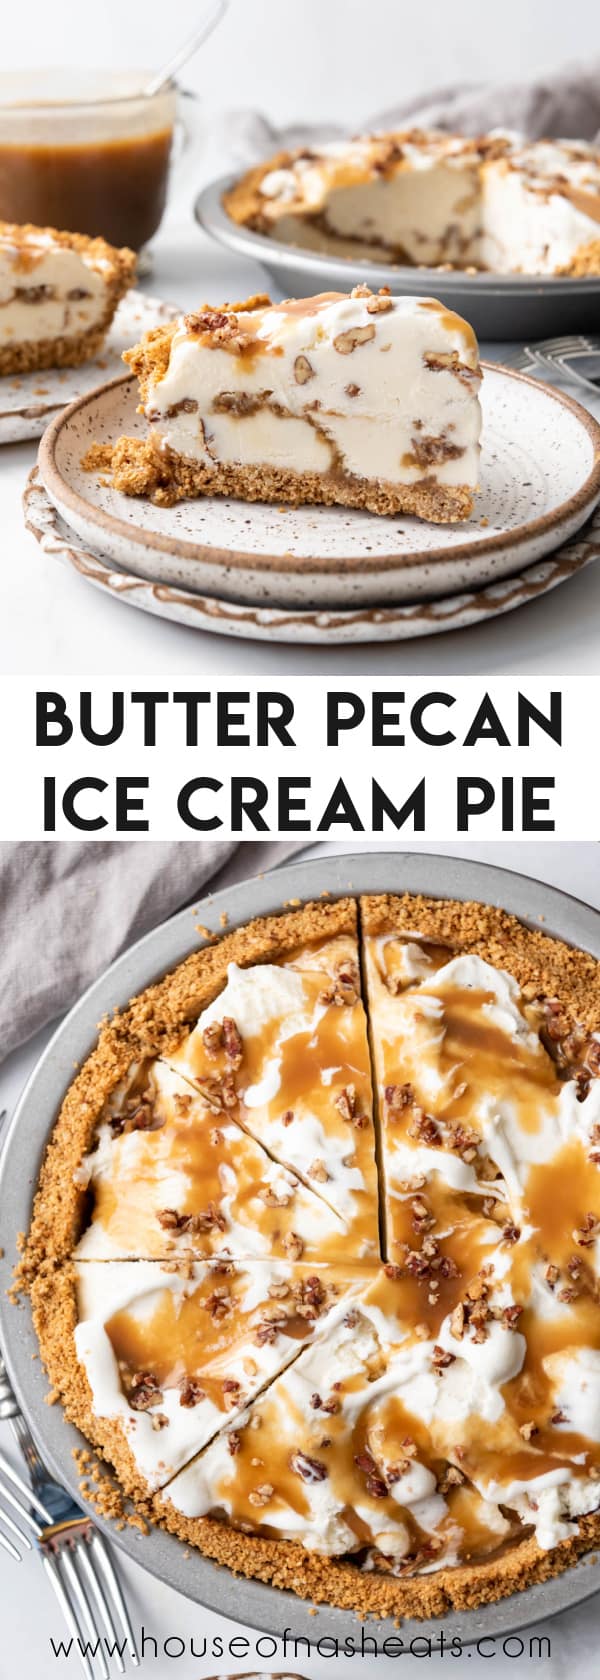 A collage of images of butter pecan ice cream pie with text overlay.